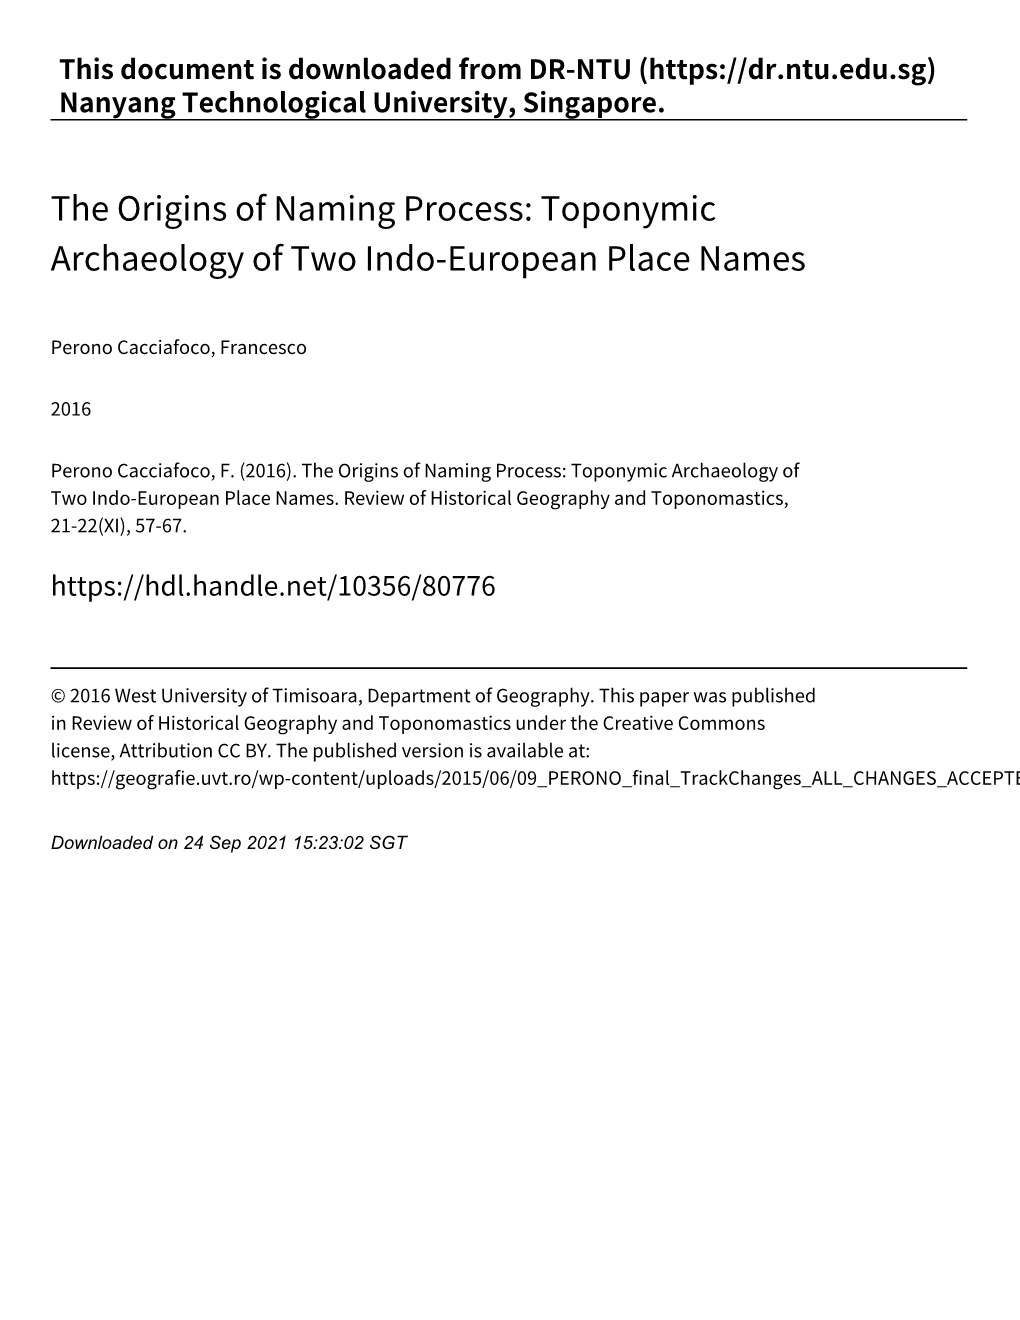 The Origins of Naming Process: Toponymic Archaeology of Two Indo‑European Place Names